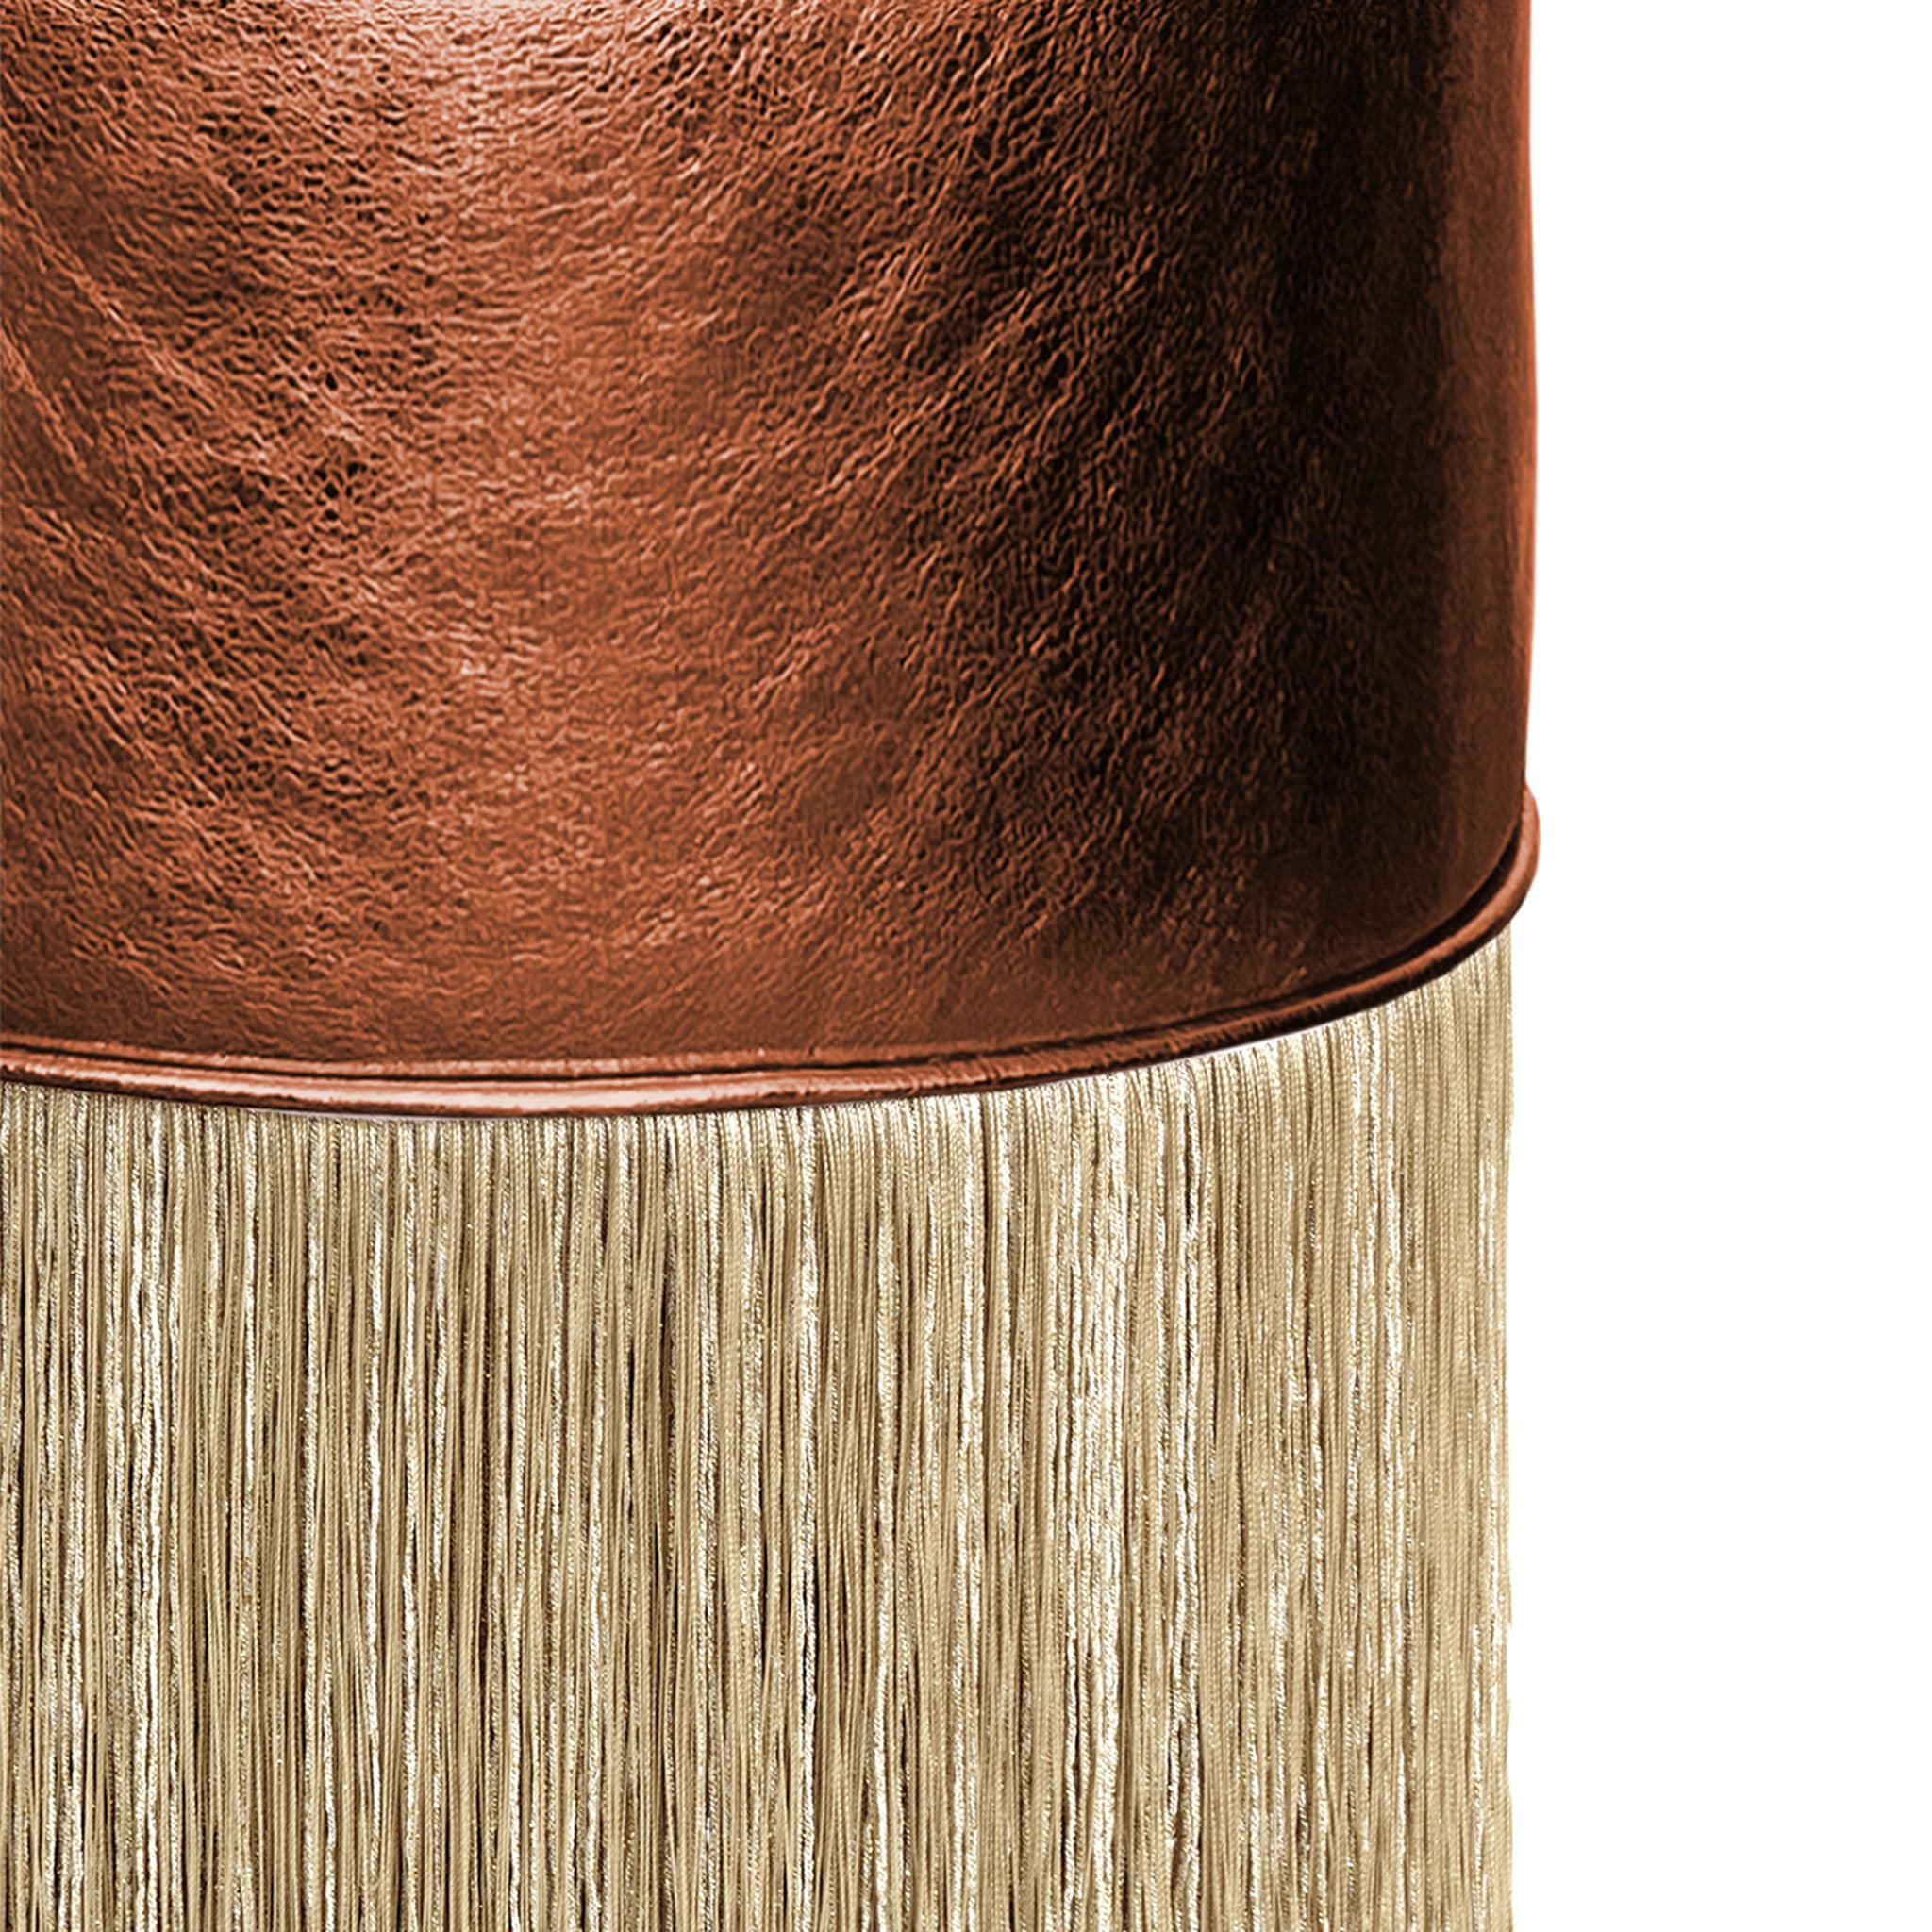 Gleaming Couture Copper Leather Gold Pouf by Lorenza Bozzoli - Alternative view 1